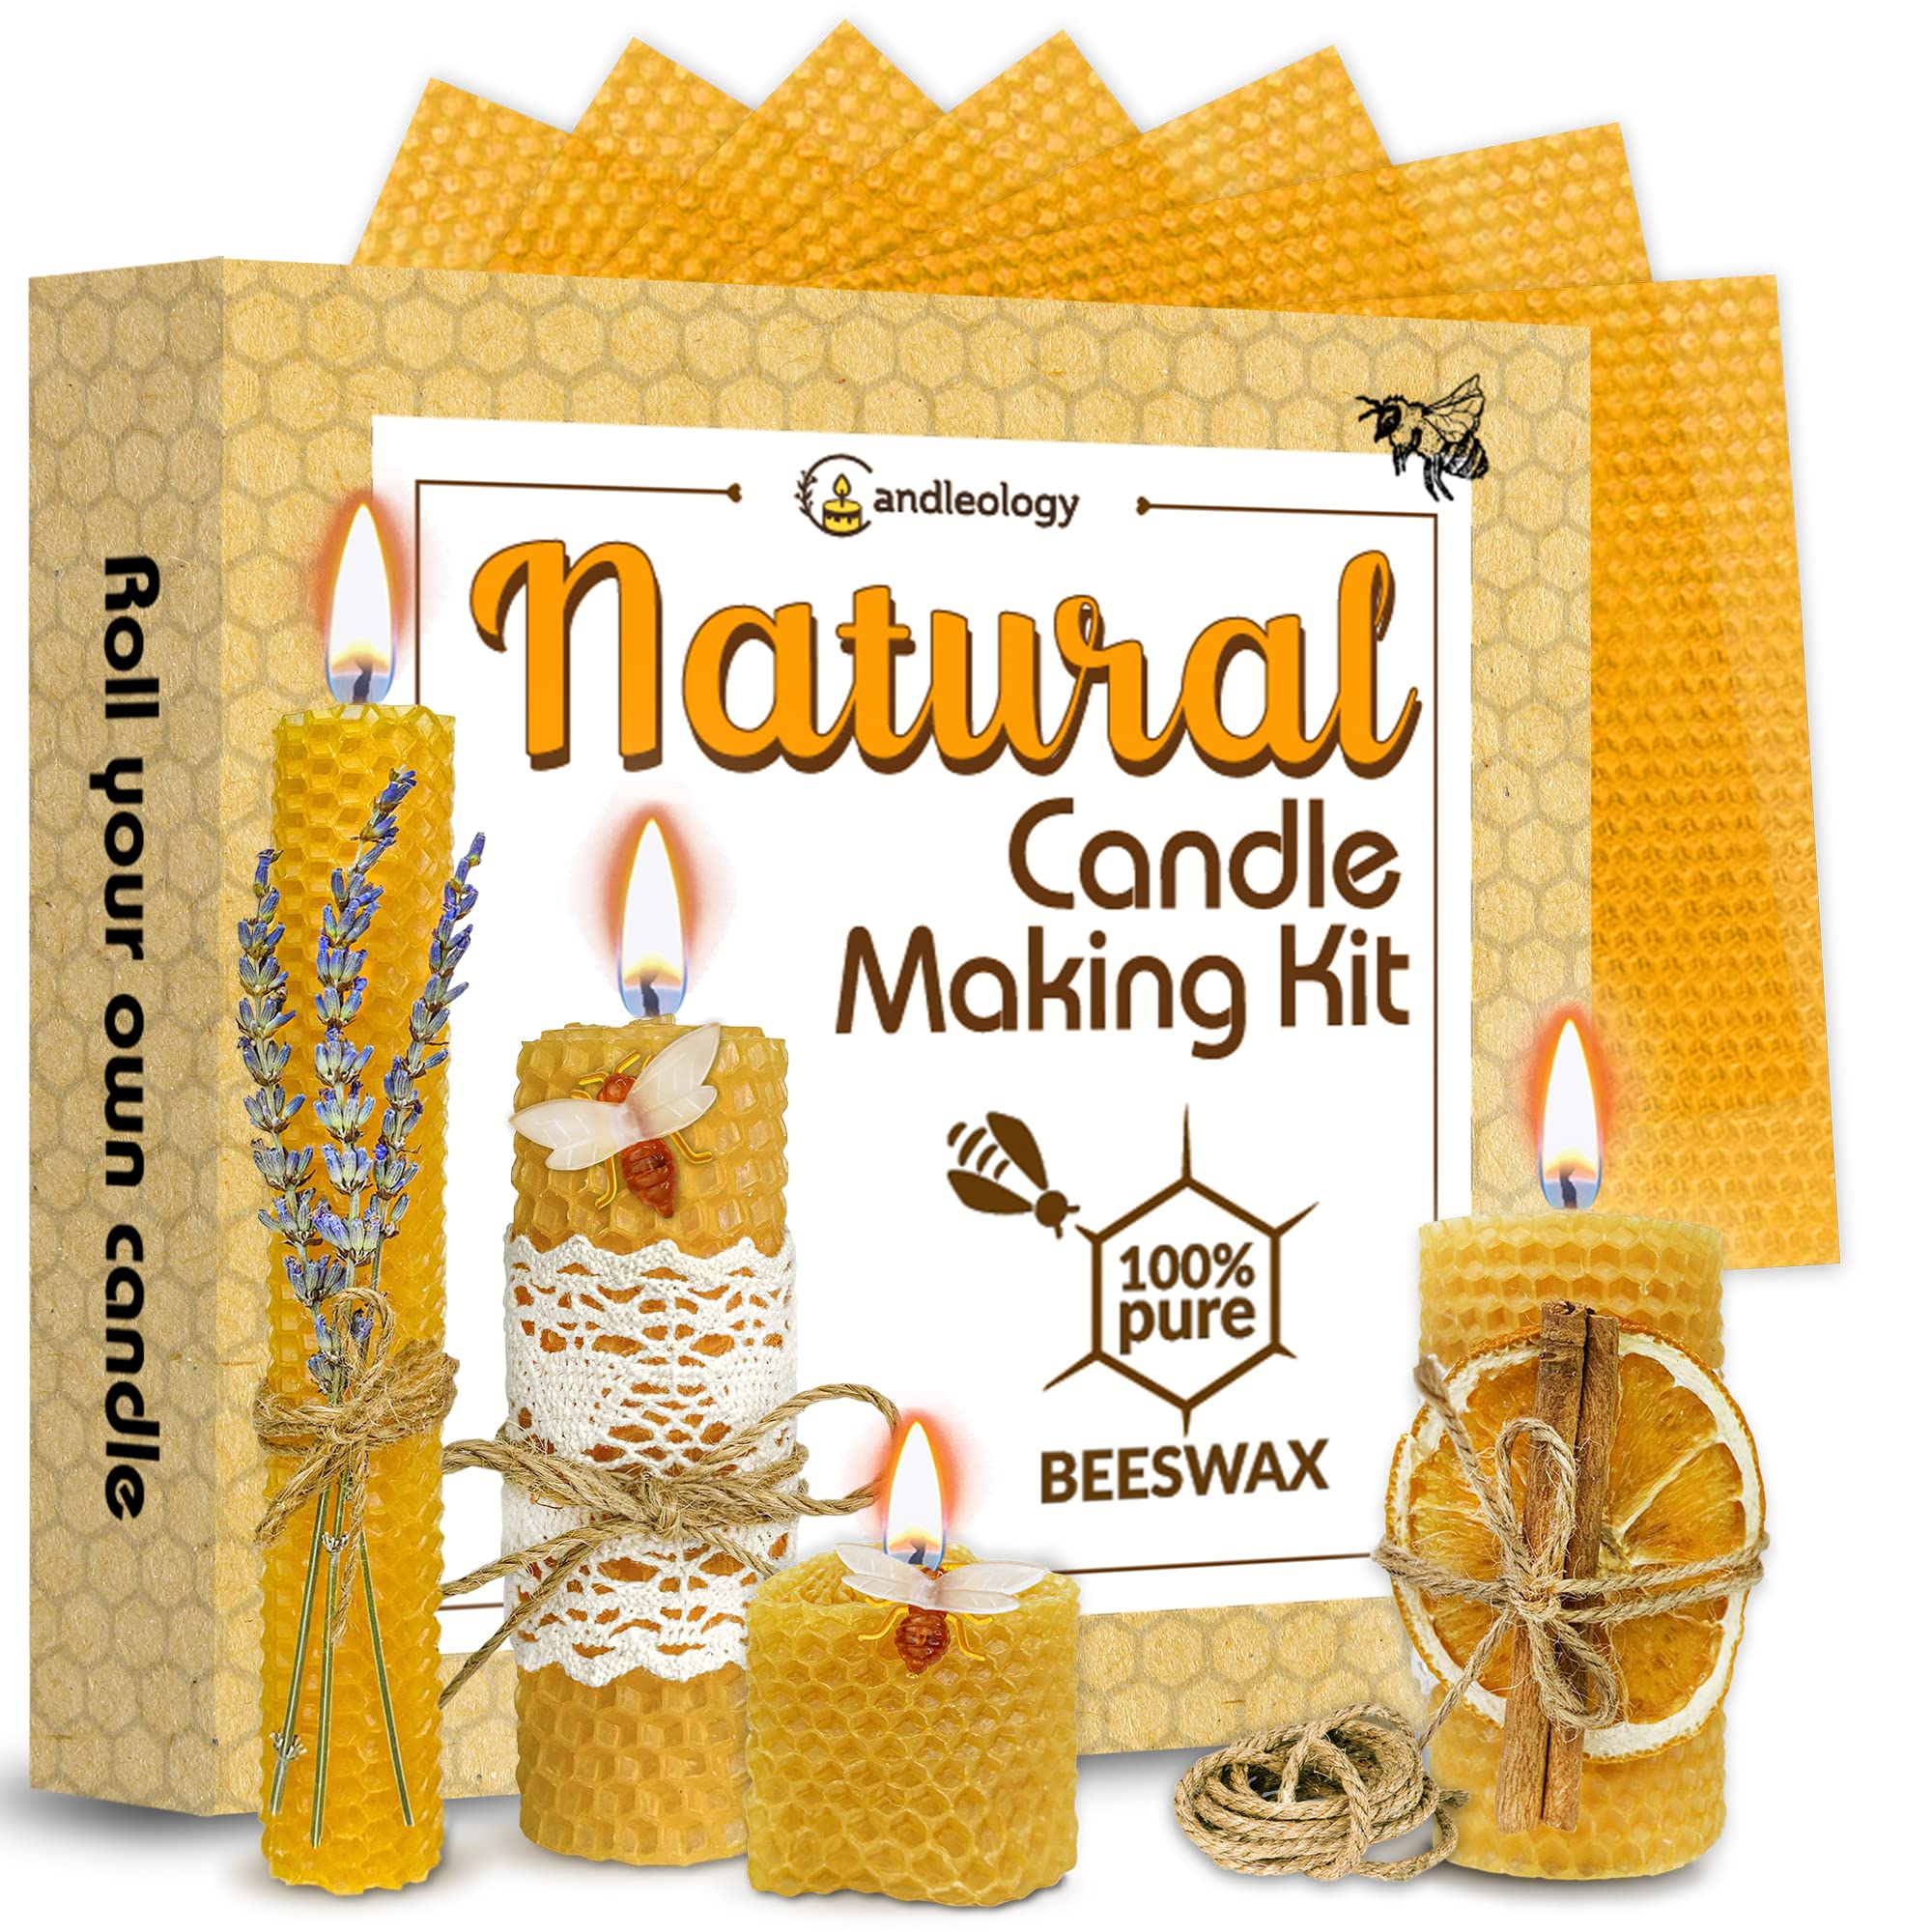 Colorful Beeswax Sheets for Candle Making Organic Beeswax Candle Making Kit  for Adults & Kids Natural Beeswax DIY Candle Rolling Kit 